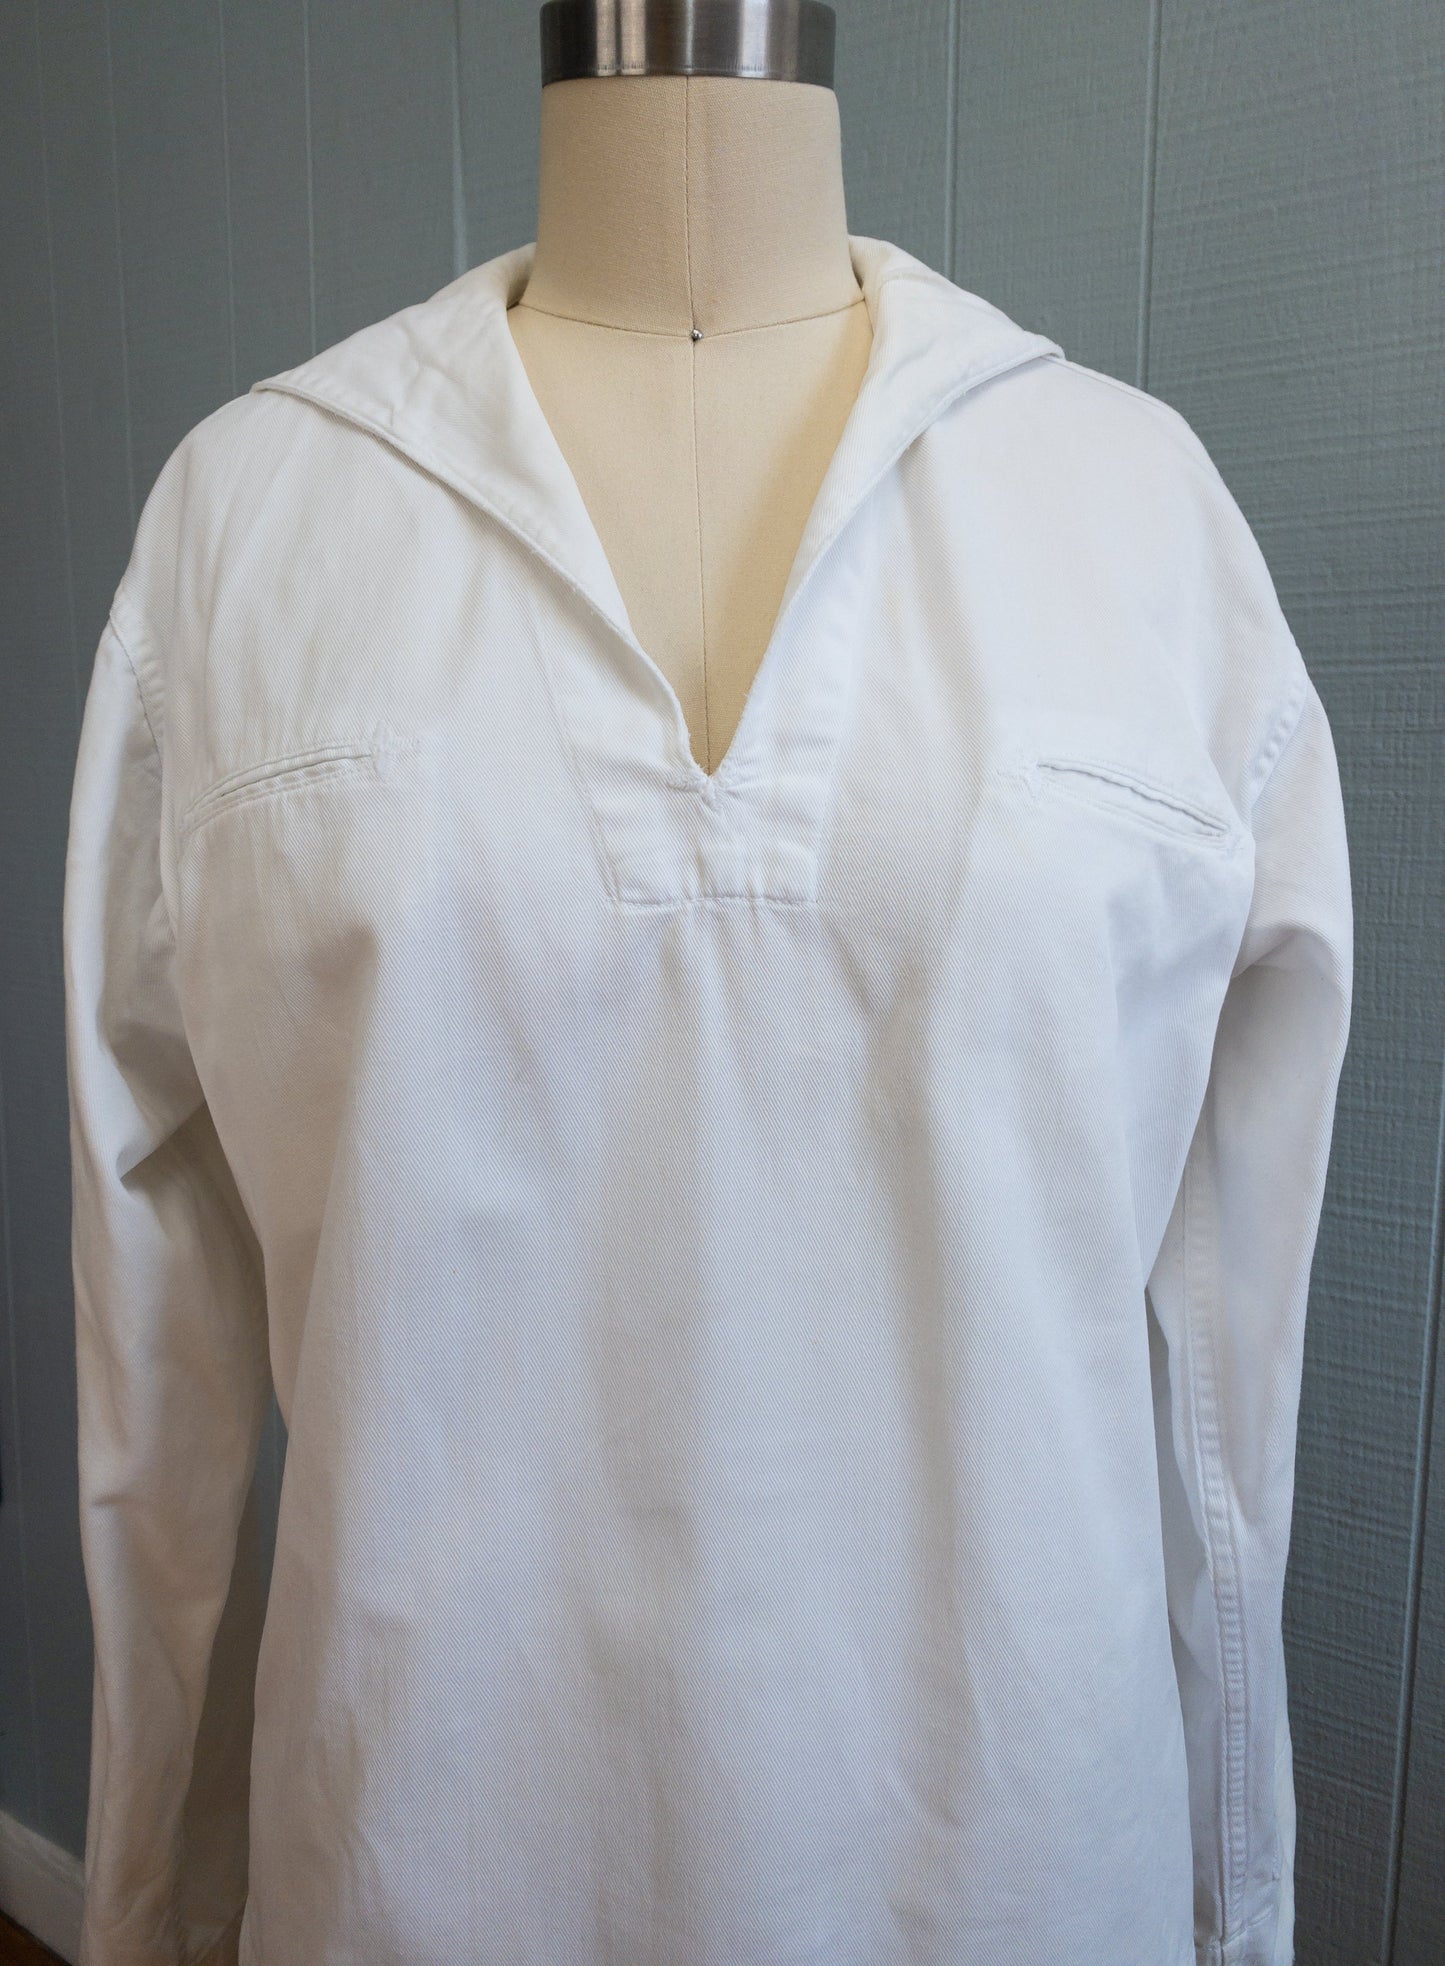 60s White Sailor Patched Top